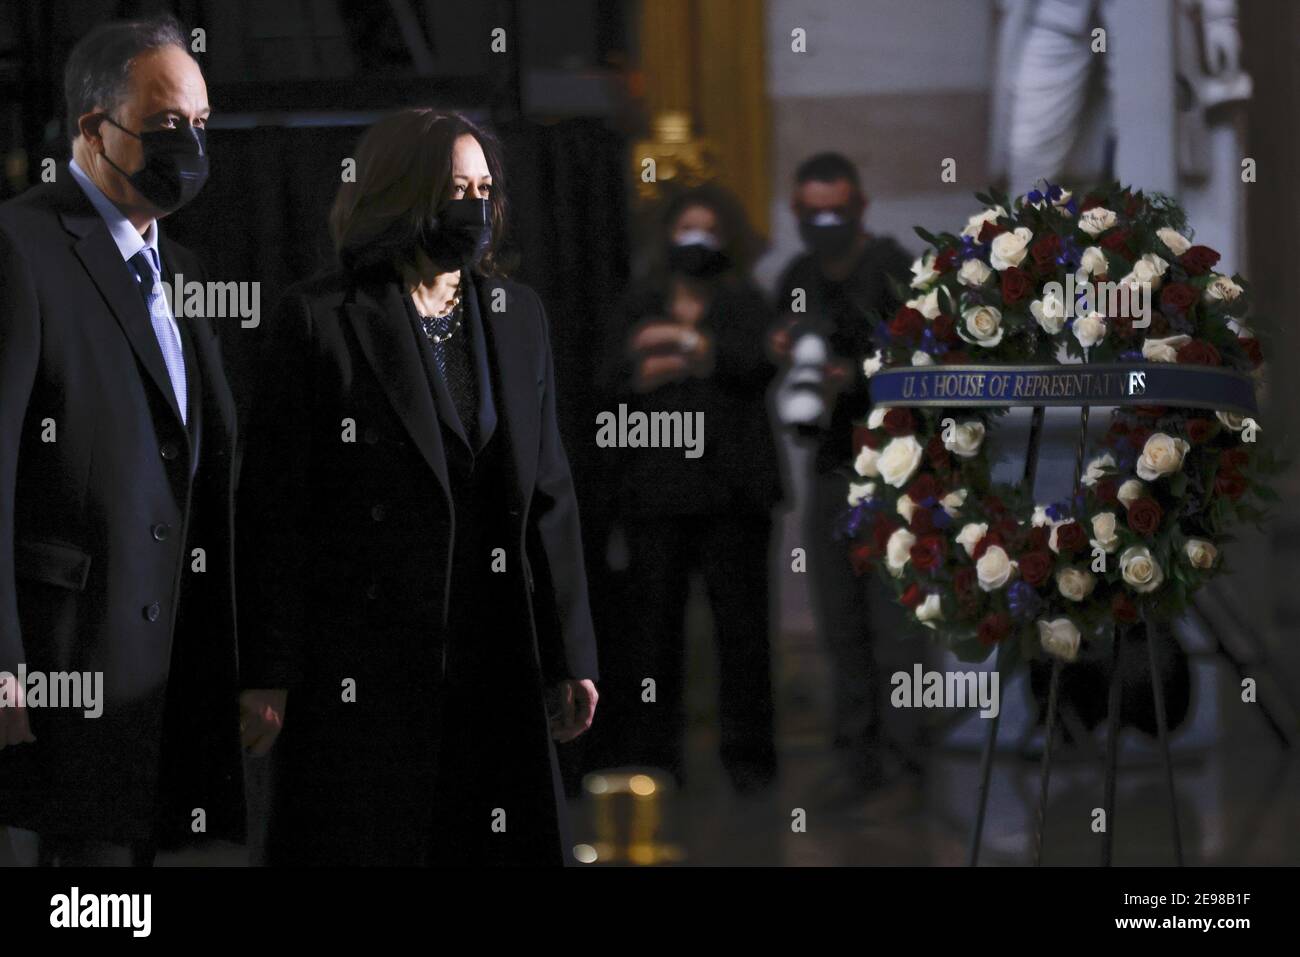 Washington, United States. 03rd Feb, 2021. US Vice President Kamala Harris and second gentleman Doug Emhoff pay respects at the remains of Capitol Police officer Brian Sicknick lie in honor in the Rotunda of the US Capitol building after he died during the January 6th attack on Capitol Hill by a pro-Trump mob February 3, 2021, in Washington, DC. Pool Photo by Carlos Barria/UPI Credit: UPI/Alamy Live News Stock Photo